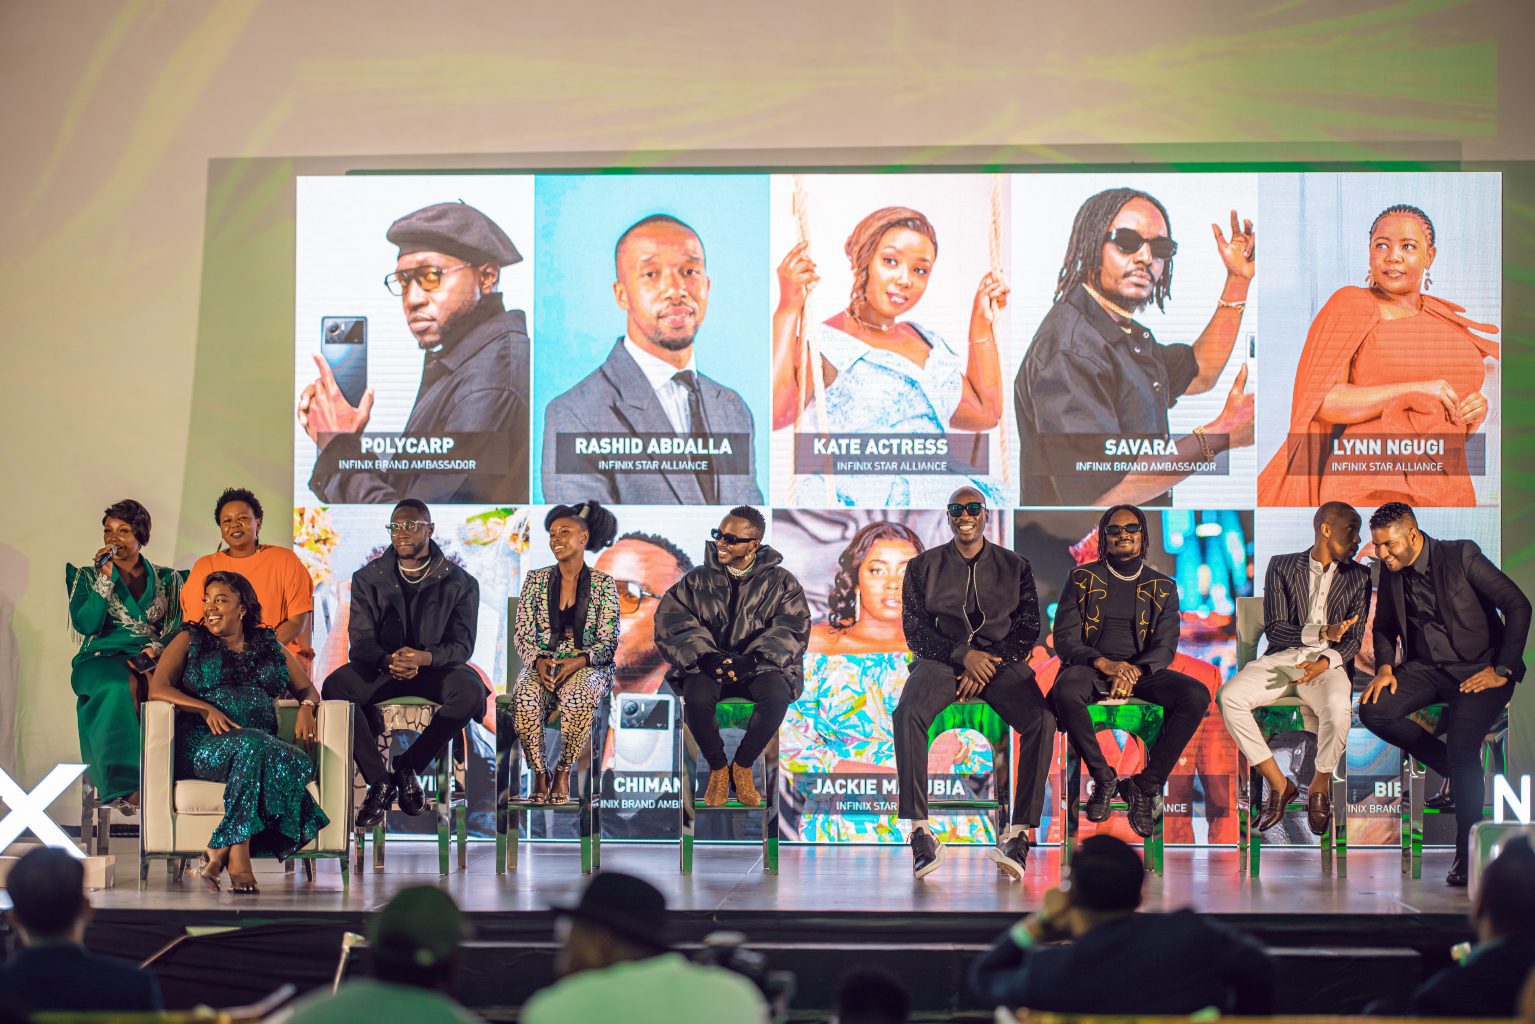 Sauti Sol together with Lynn Ngugi, award-winning actress Catherine Kamau-Karanja popularly known as Kate Actress and Chef Ali Mandhry. Other stars included actresses Jacky Vike and Jac